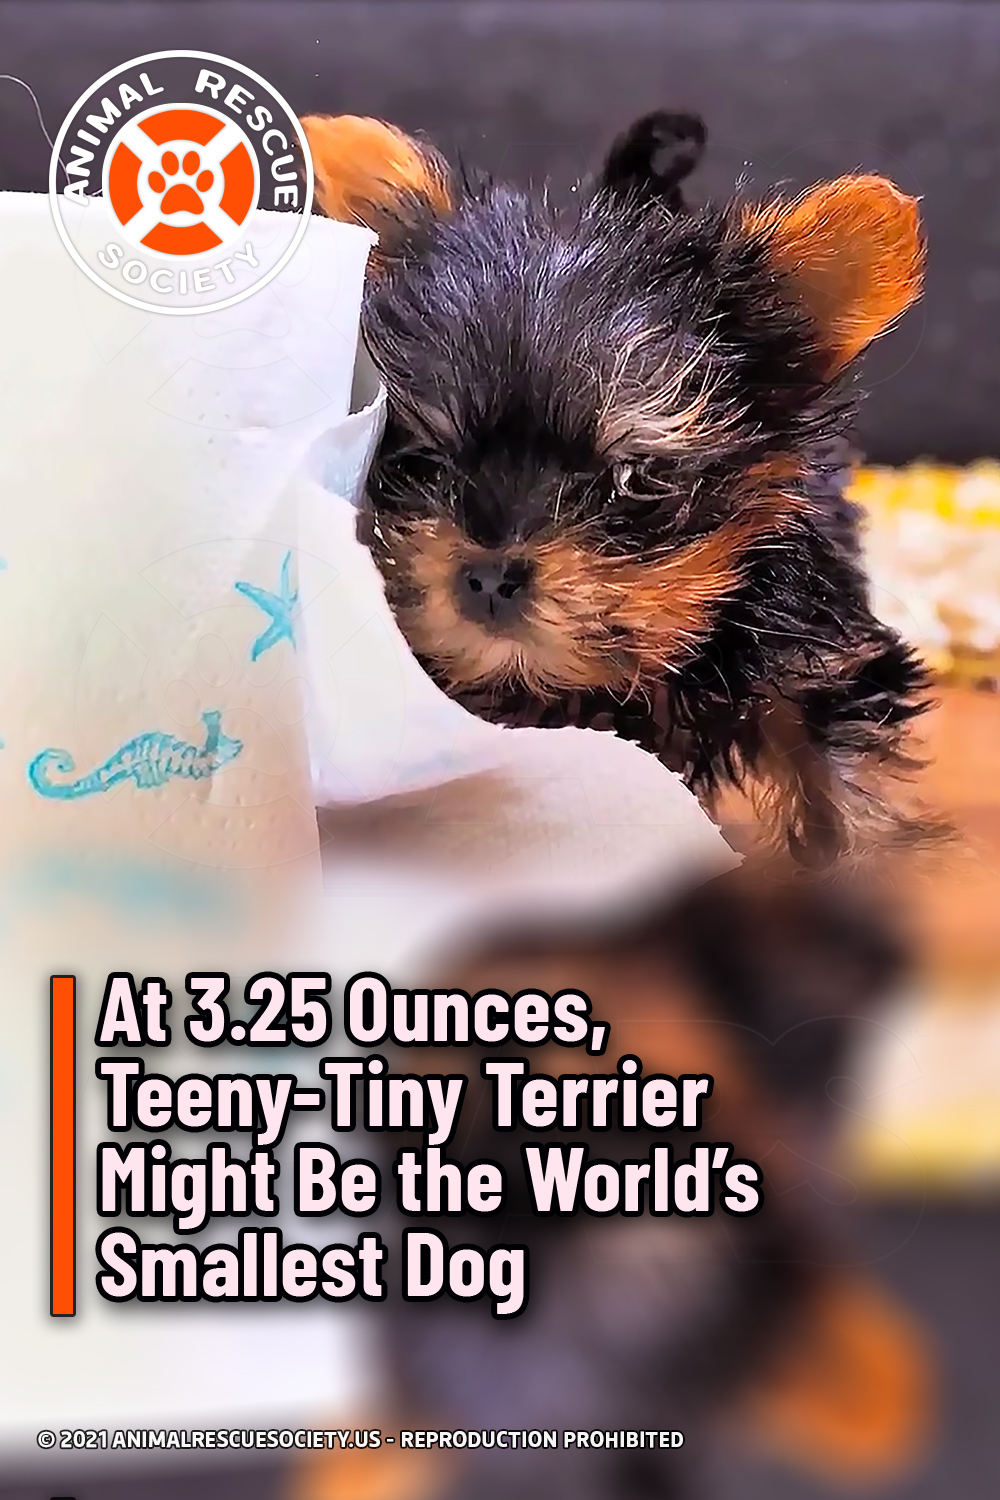 At 3.25 Ounces, Teeny-Tiny Terrier Might Be the World’s Smallest Dog